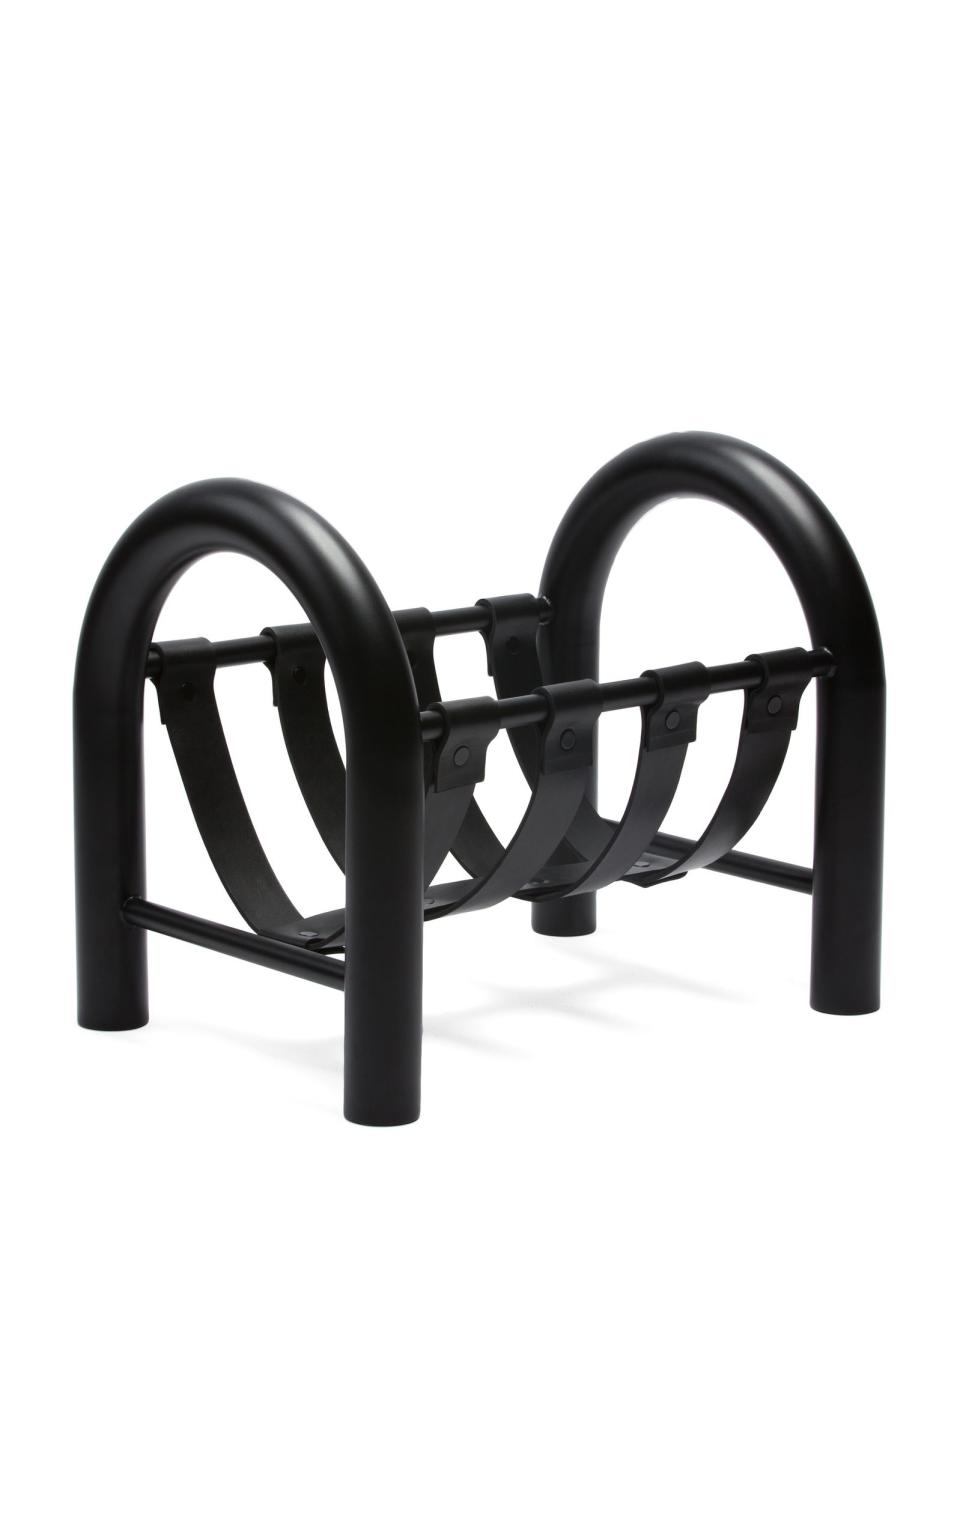 A whimsical rack for even the most serious of publications. SHOP NOW: Tubular magazine rack by Another Human, $600, 1stdibs.com